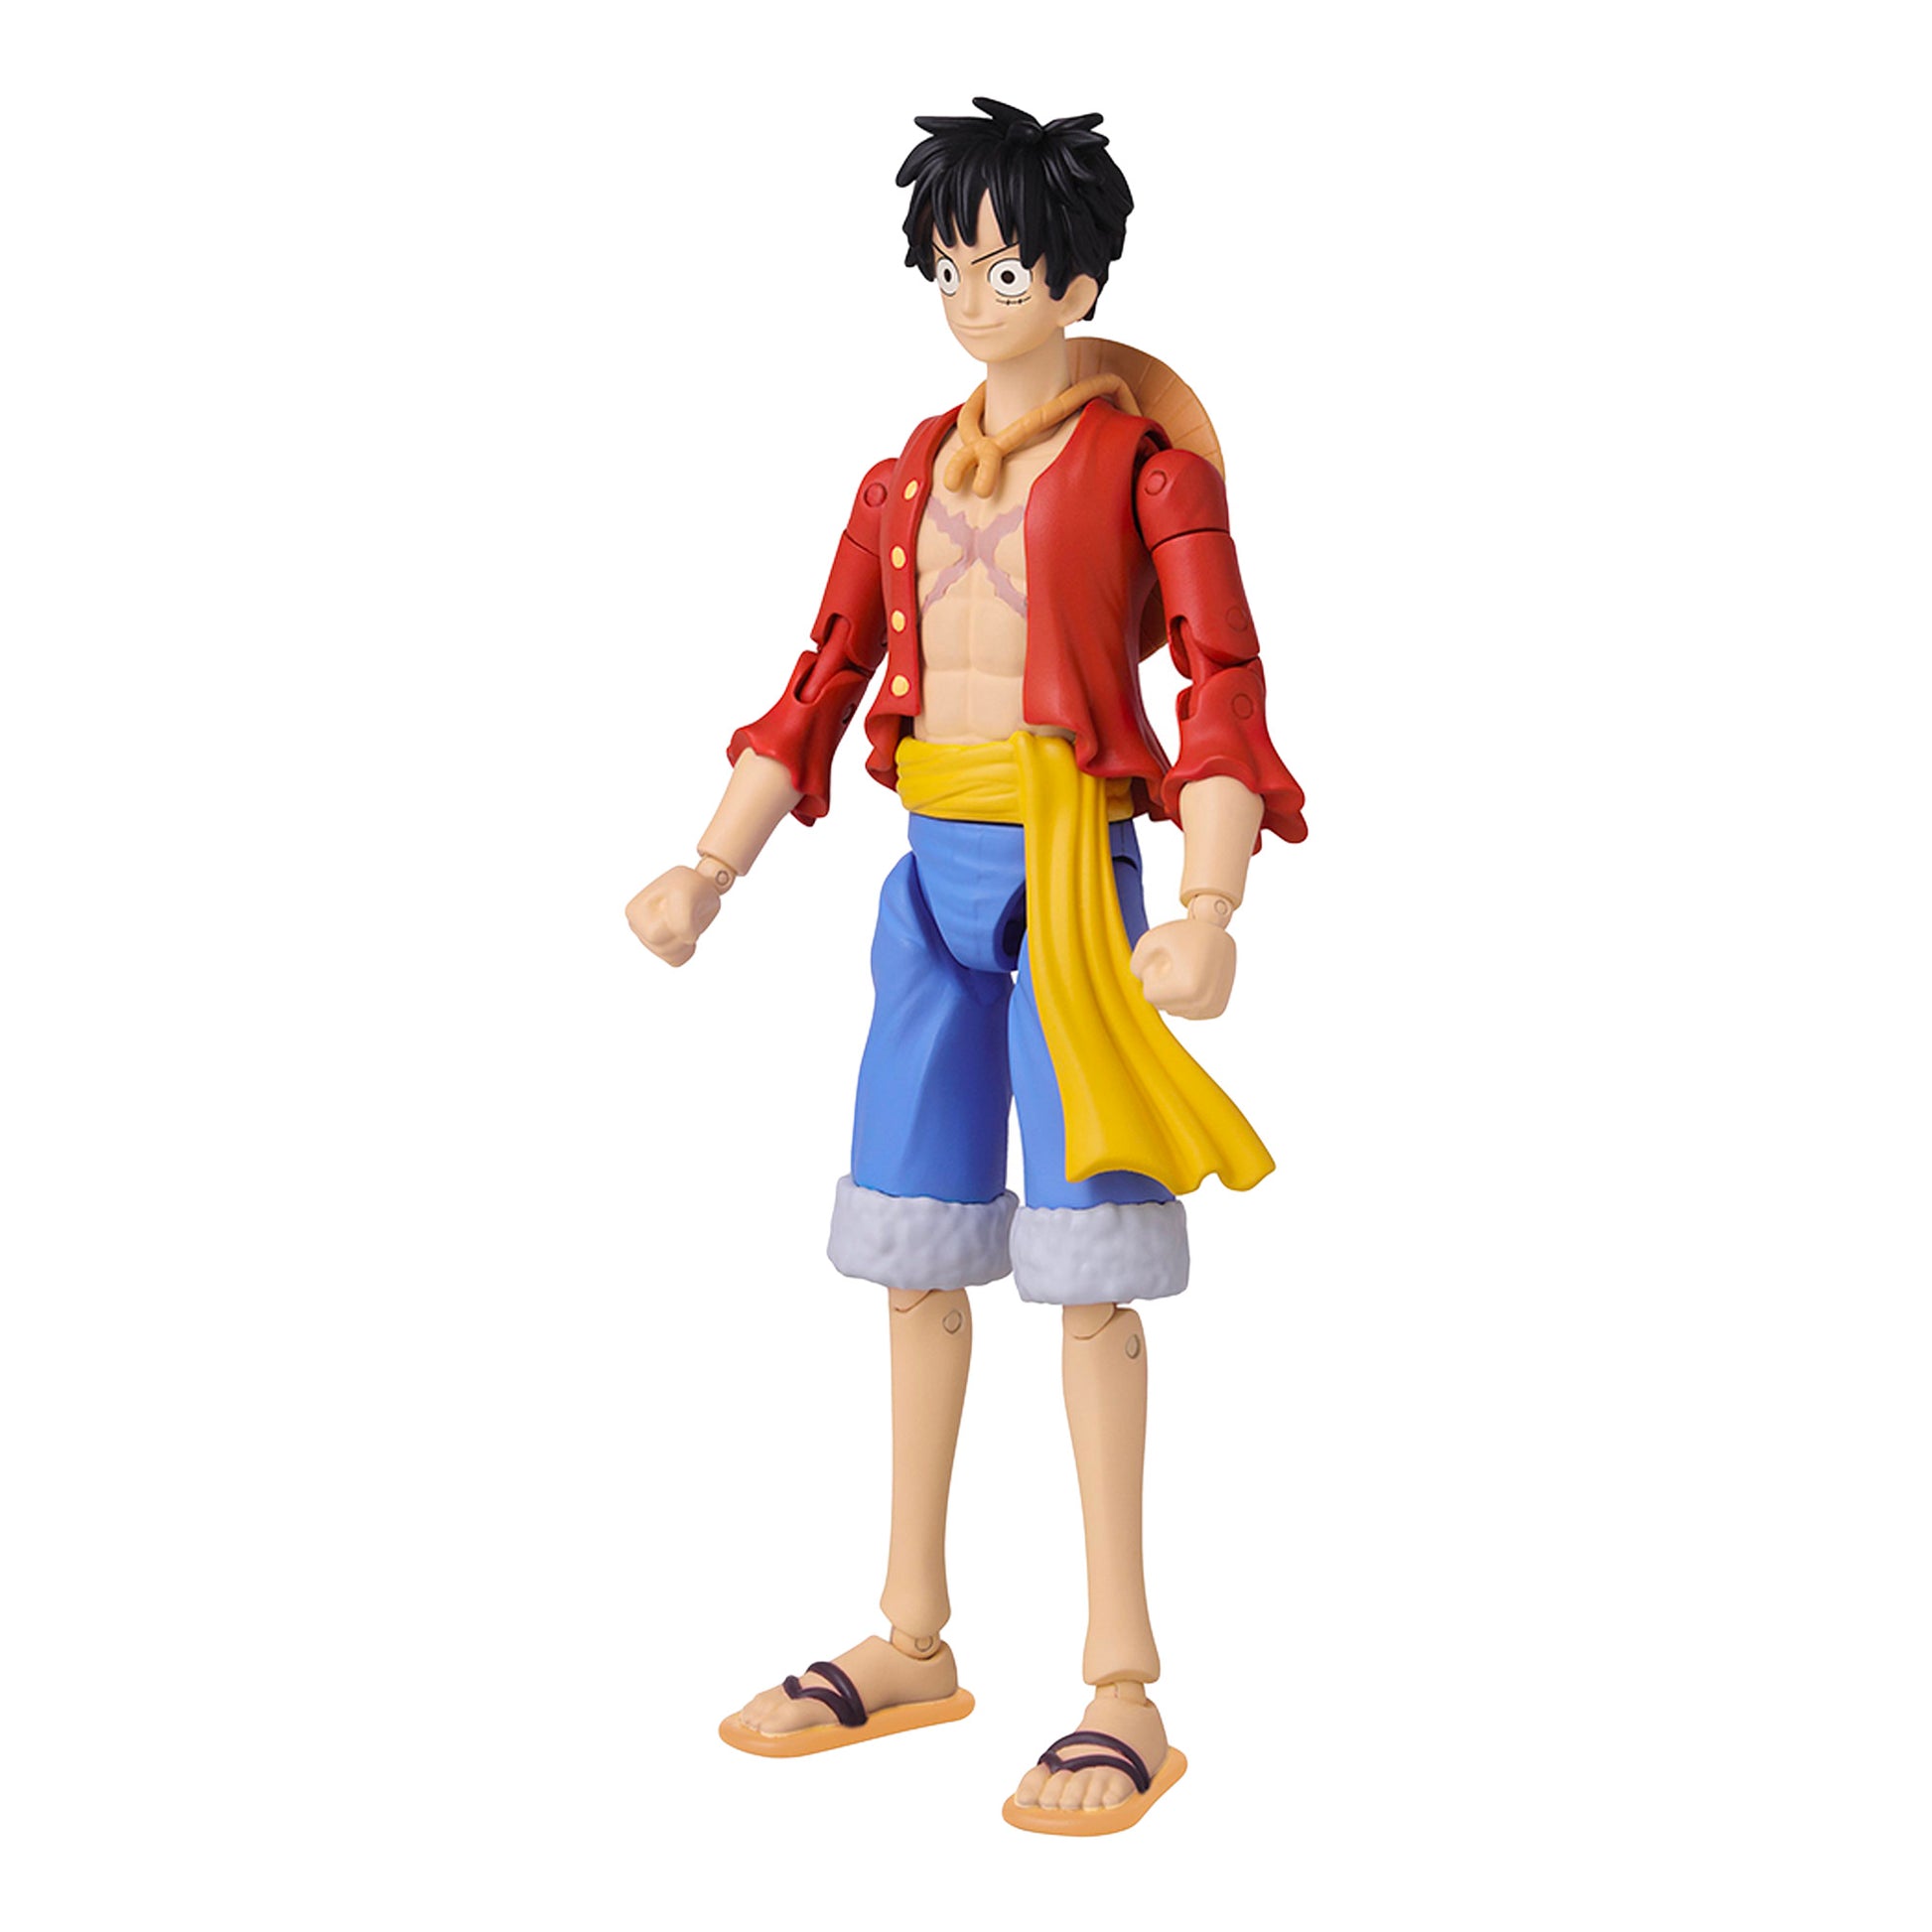 BandaI: Anime Heroes - One Piece - Monkey D. Luffy 6.5 Tall Action Figure